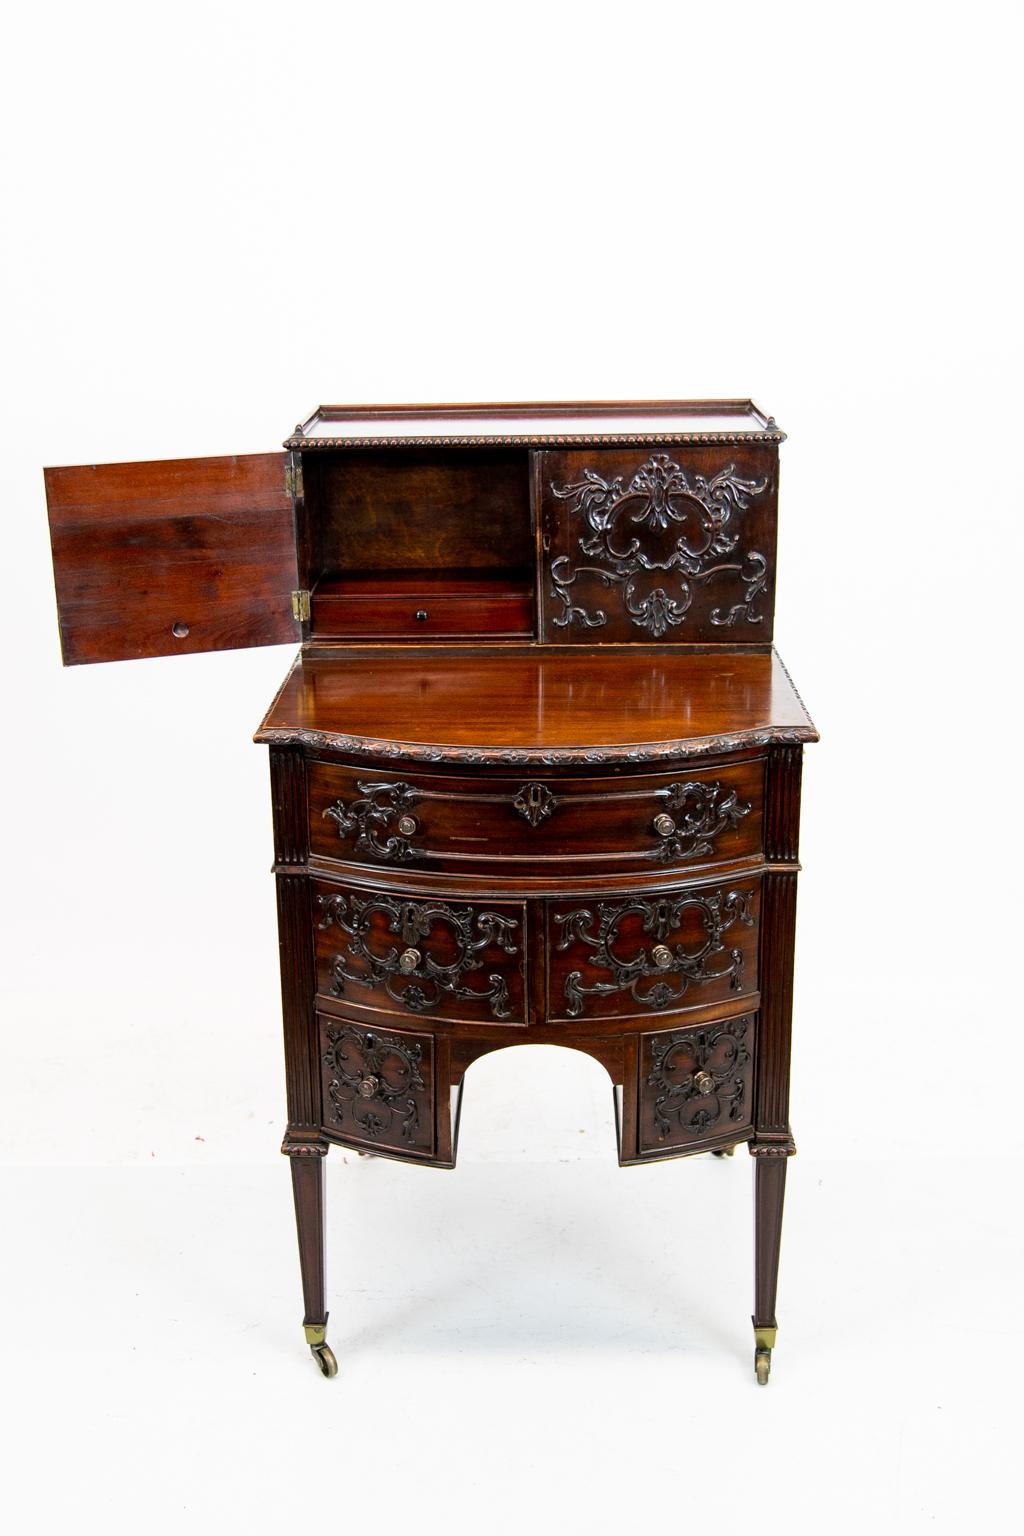 Early 19th Century Carved English Mahogany Hepplewhite Bow Front Desk On Legs